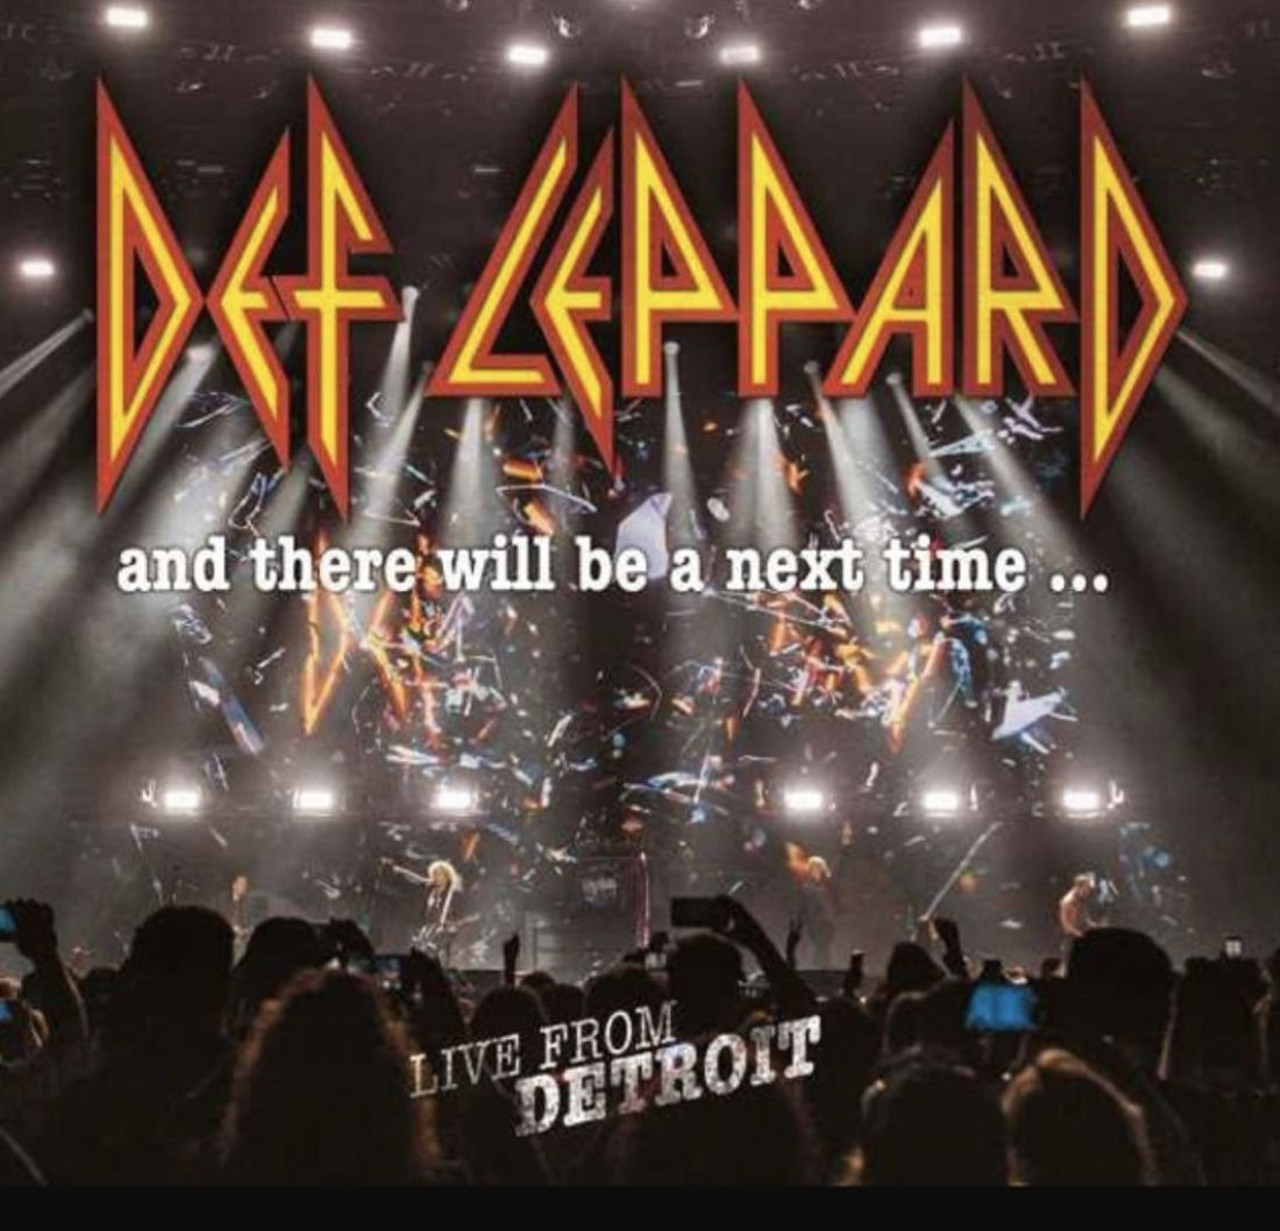  Def Leppard - And The Will Be A Next Time - Live From Detroit  We know you drove your '85 Camaro to Pine Knob for this show on July 15, 2016. It's got all the monster cock rock jams and ballads like "Pour Some Sugar On Me," "Rock On," and "Love Bites"!